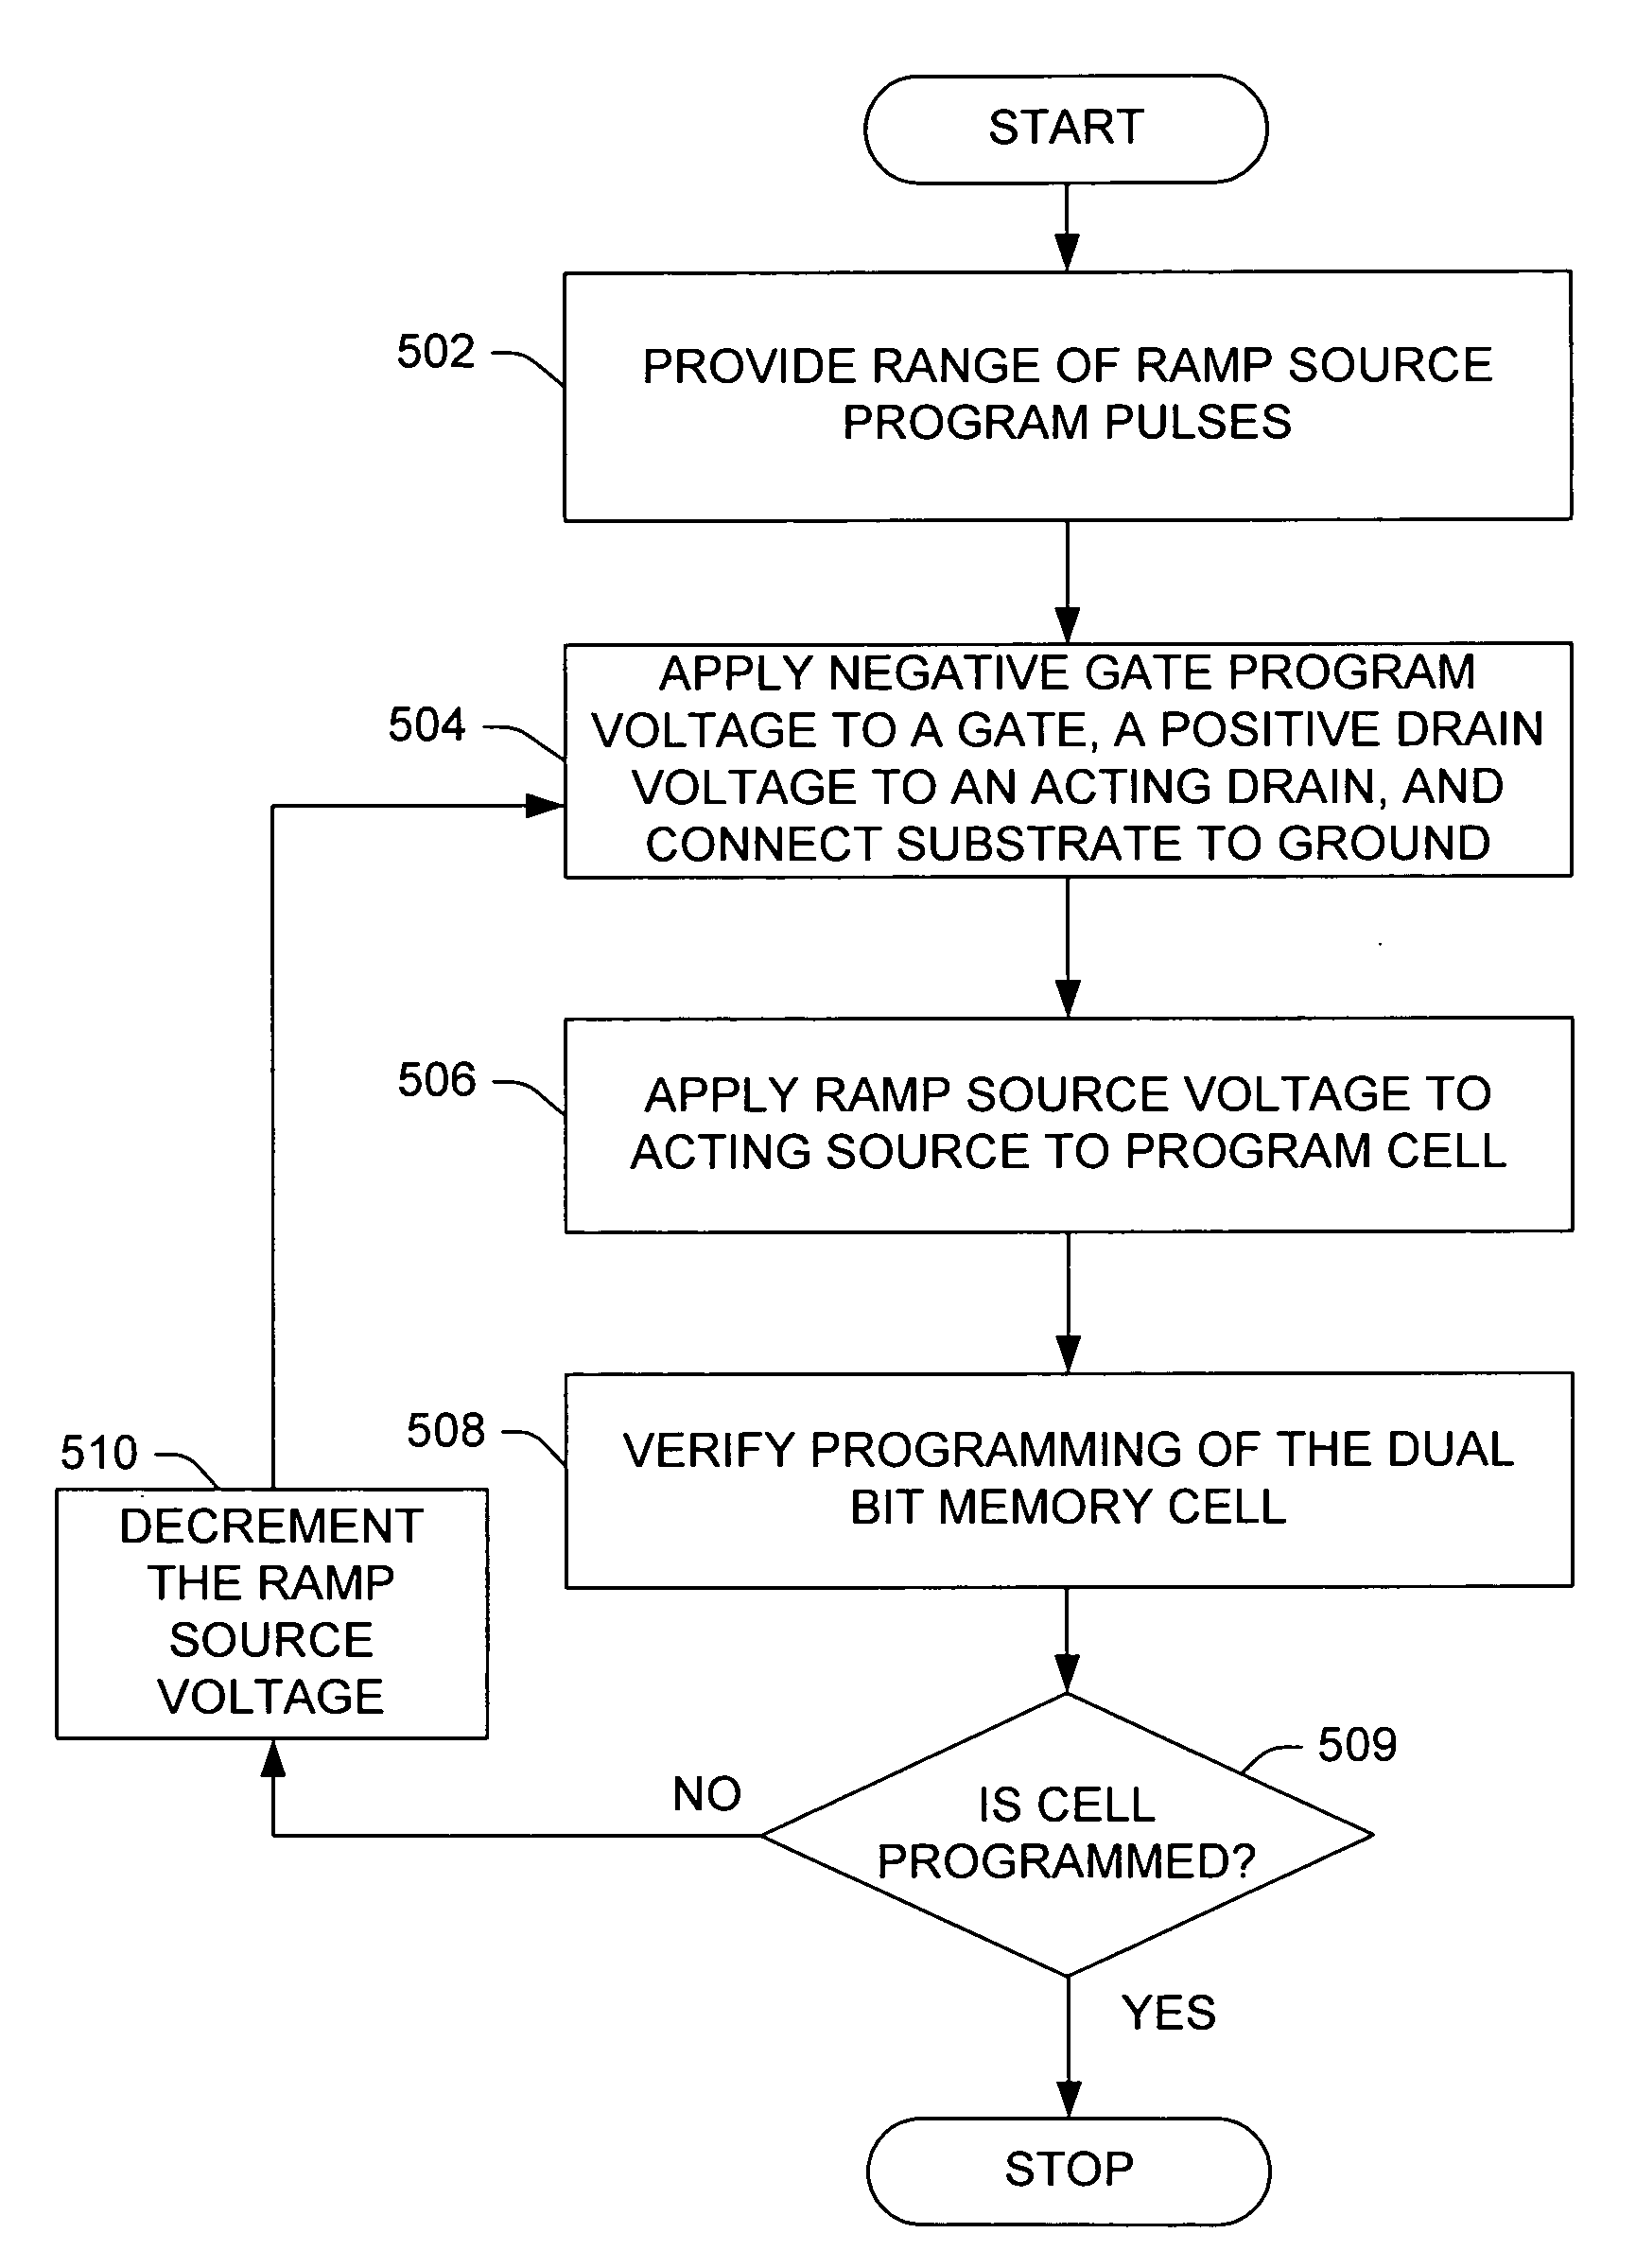 Ramp source hot-hole programming for trap based non-volatile memory devices